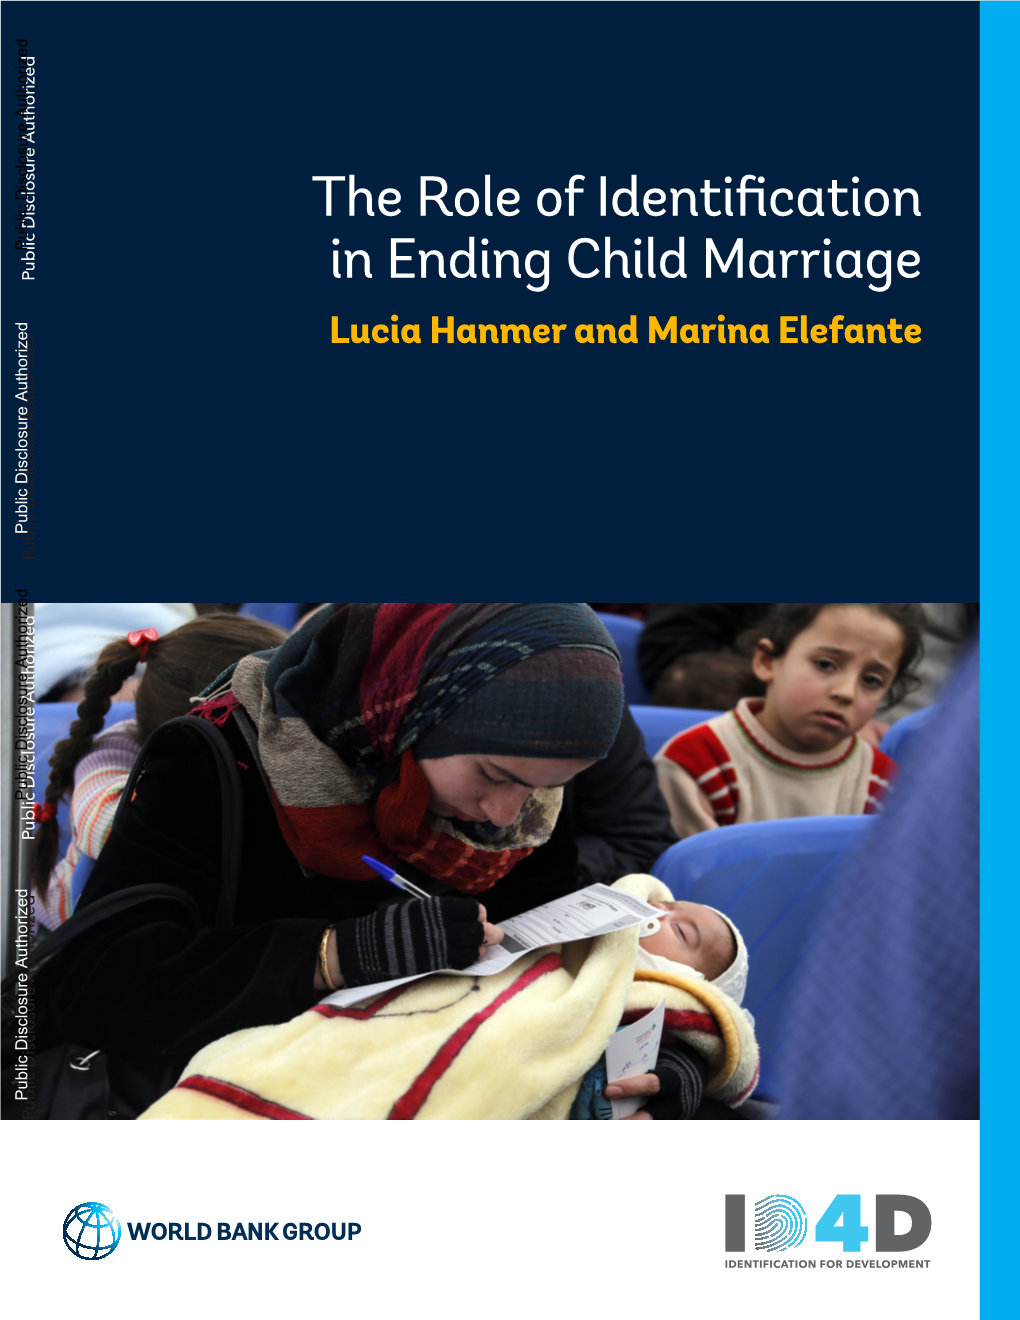 The Role of Identification in Ending Child Marriage: Identification for Development (ID4D)